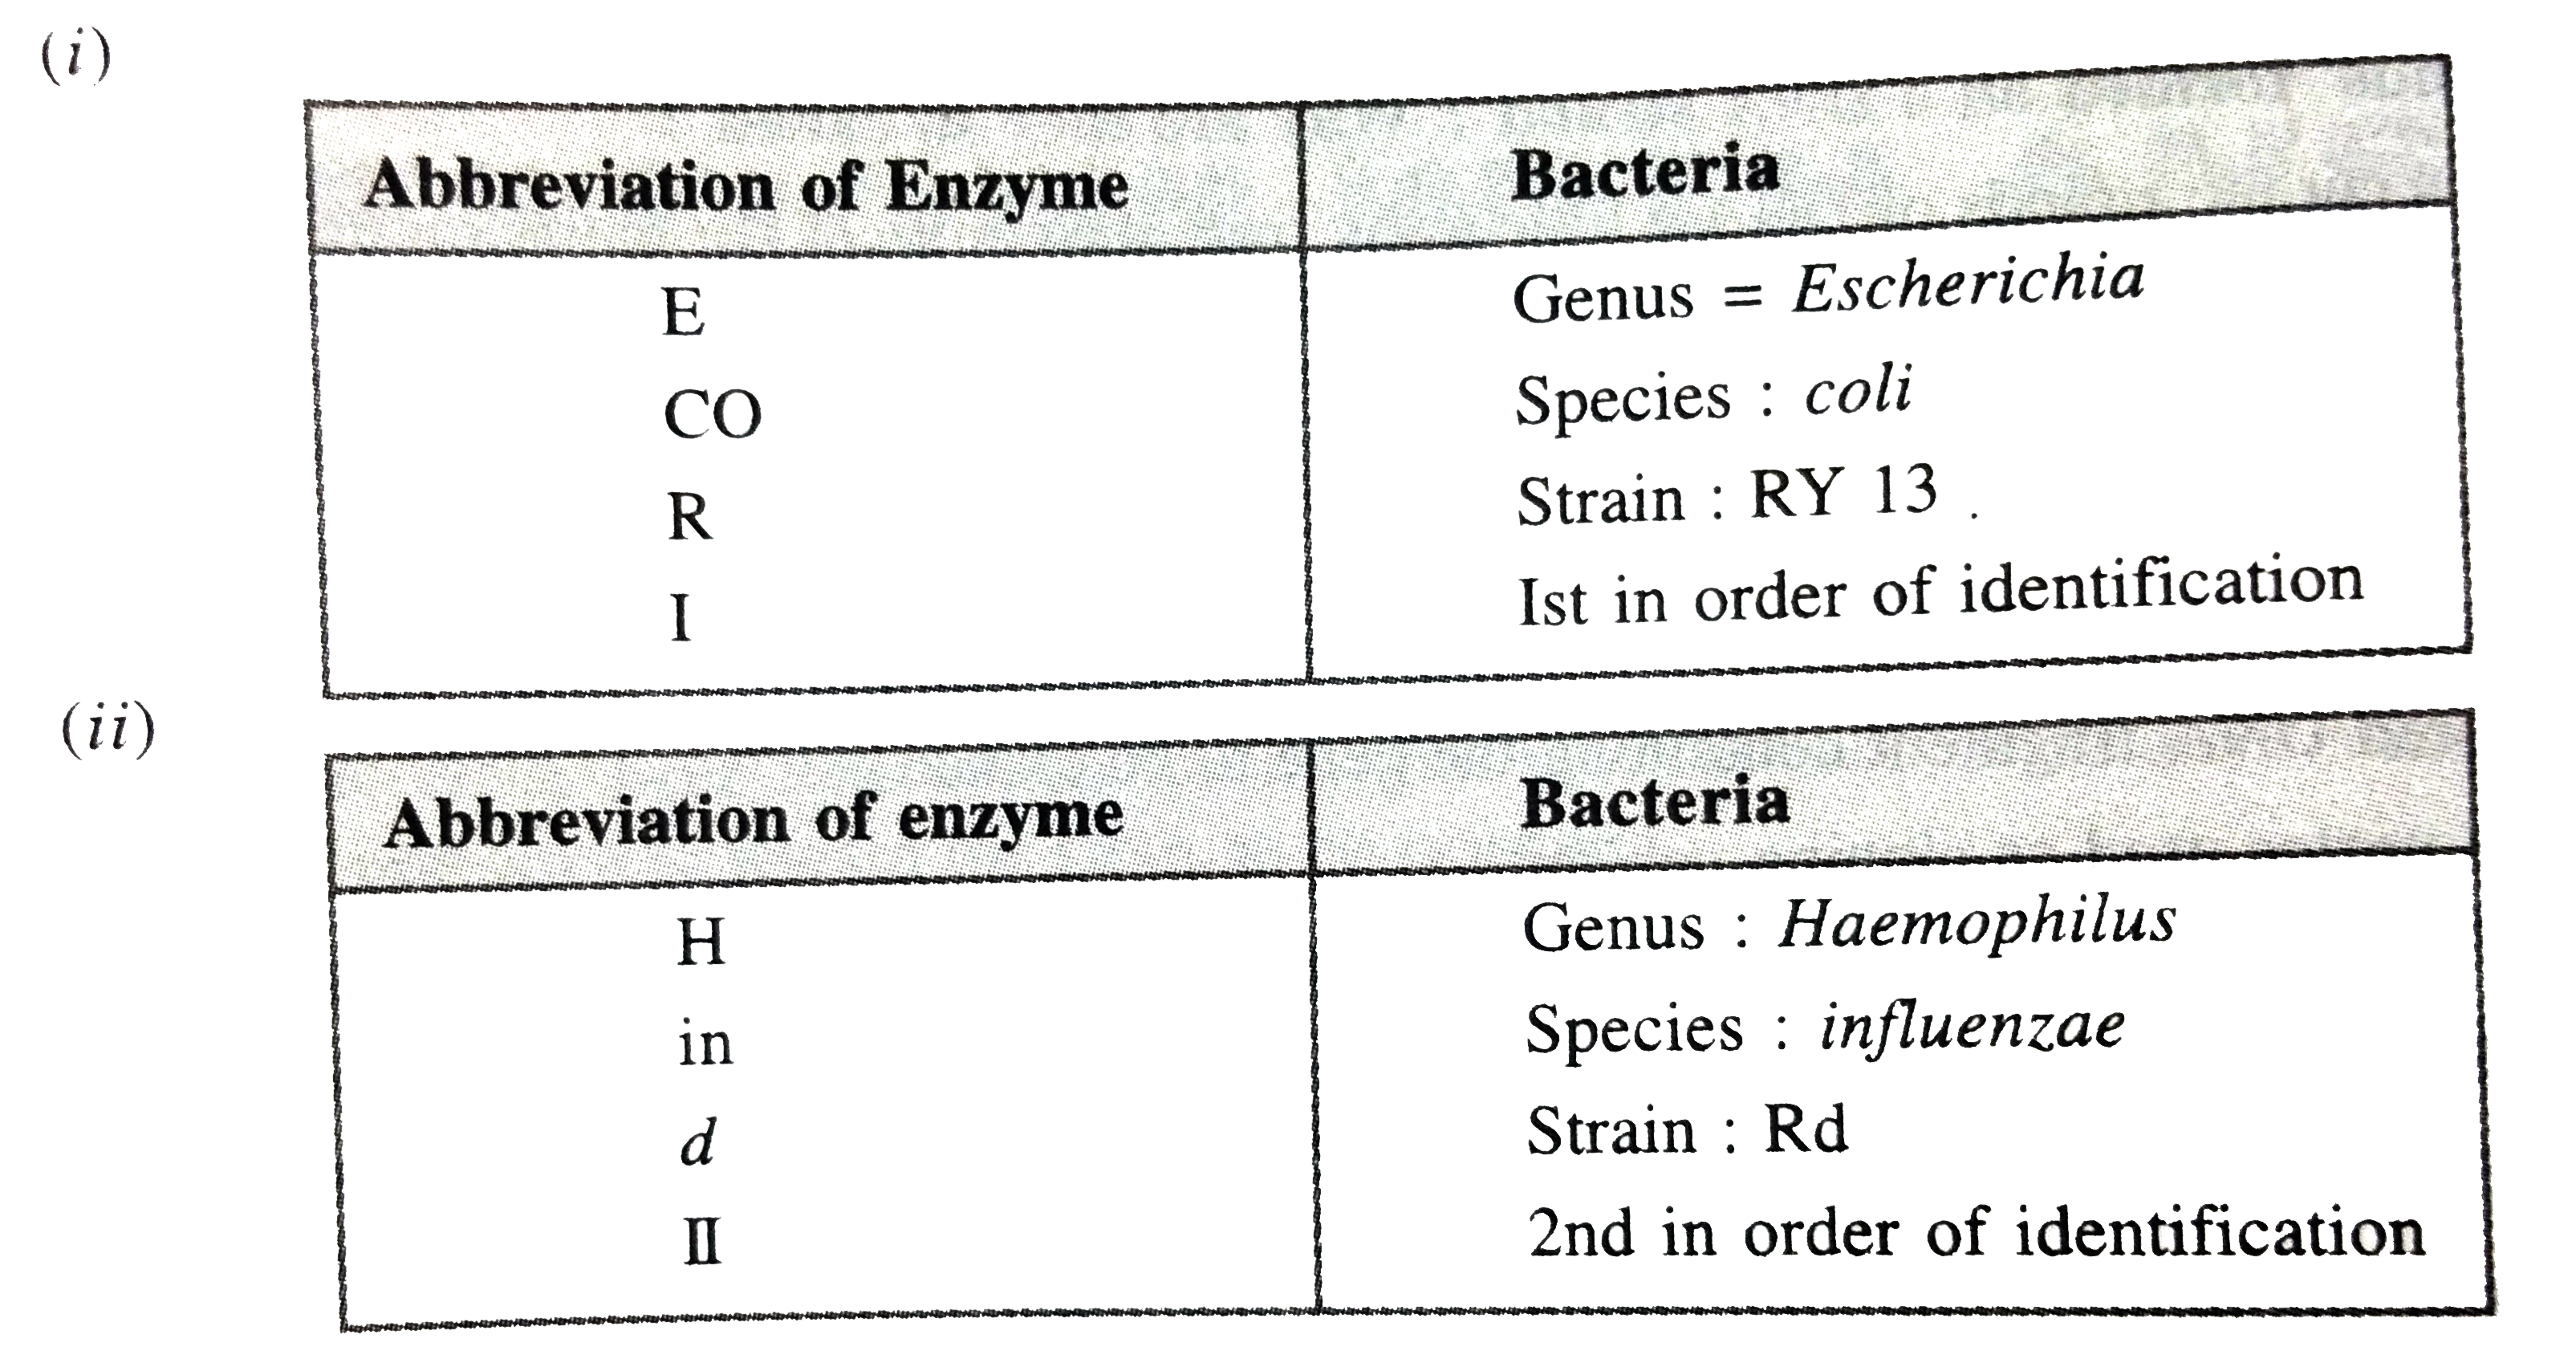 Write the name of genus, species, strain of source bacteria from